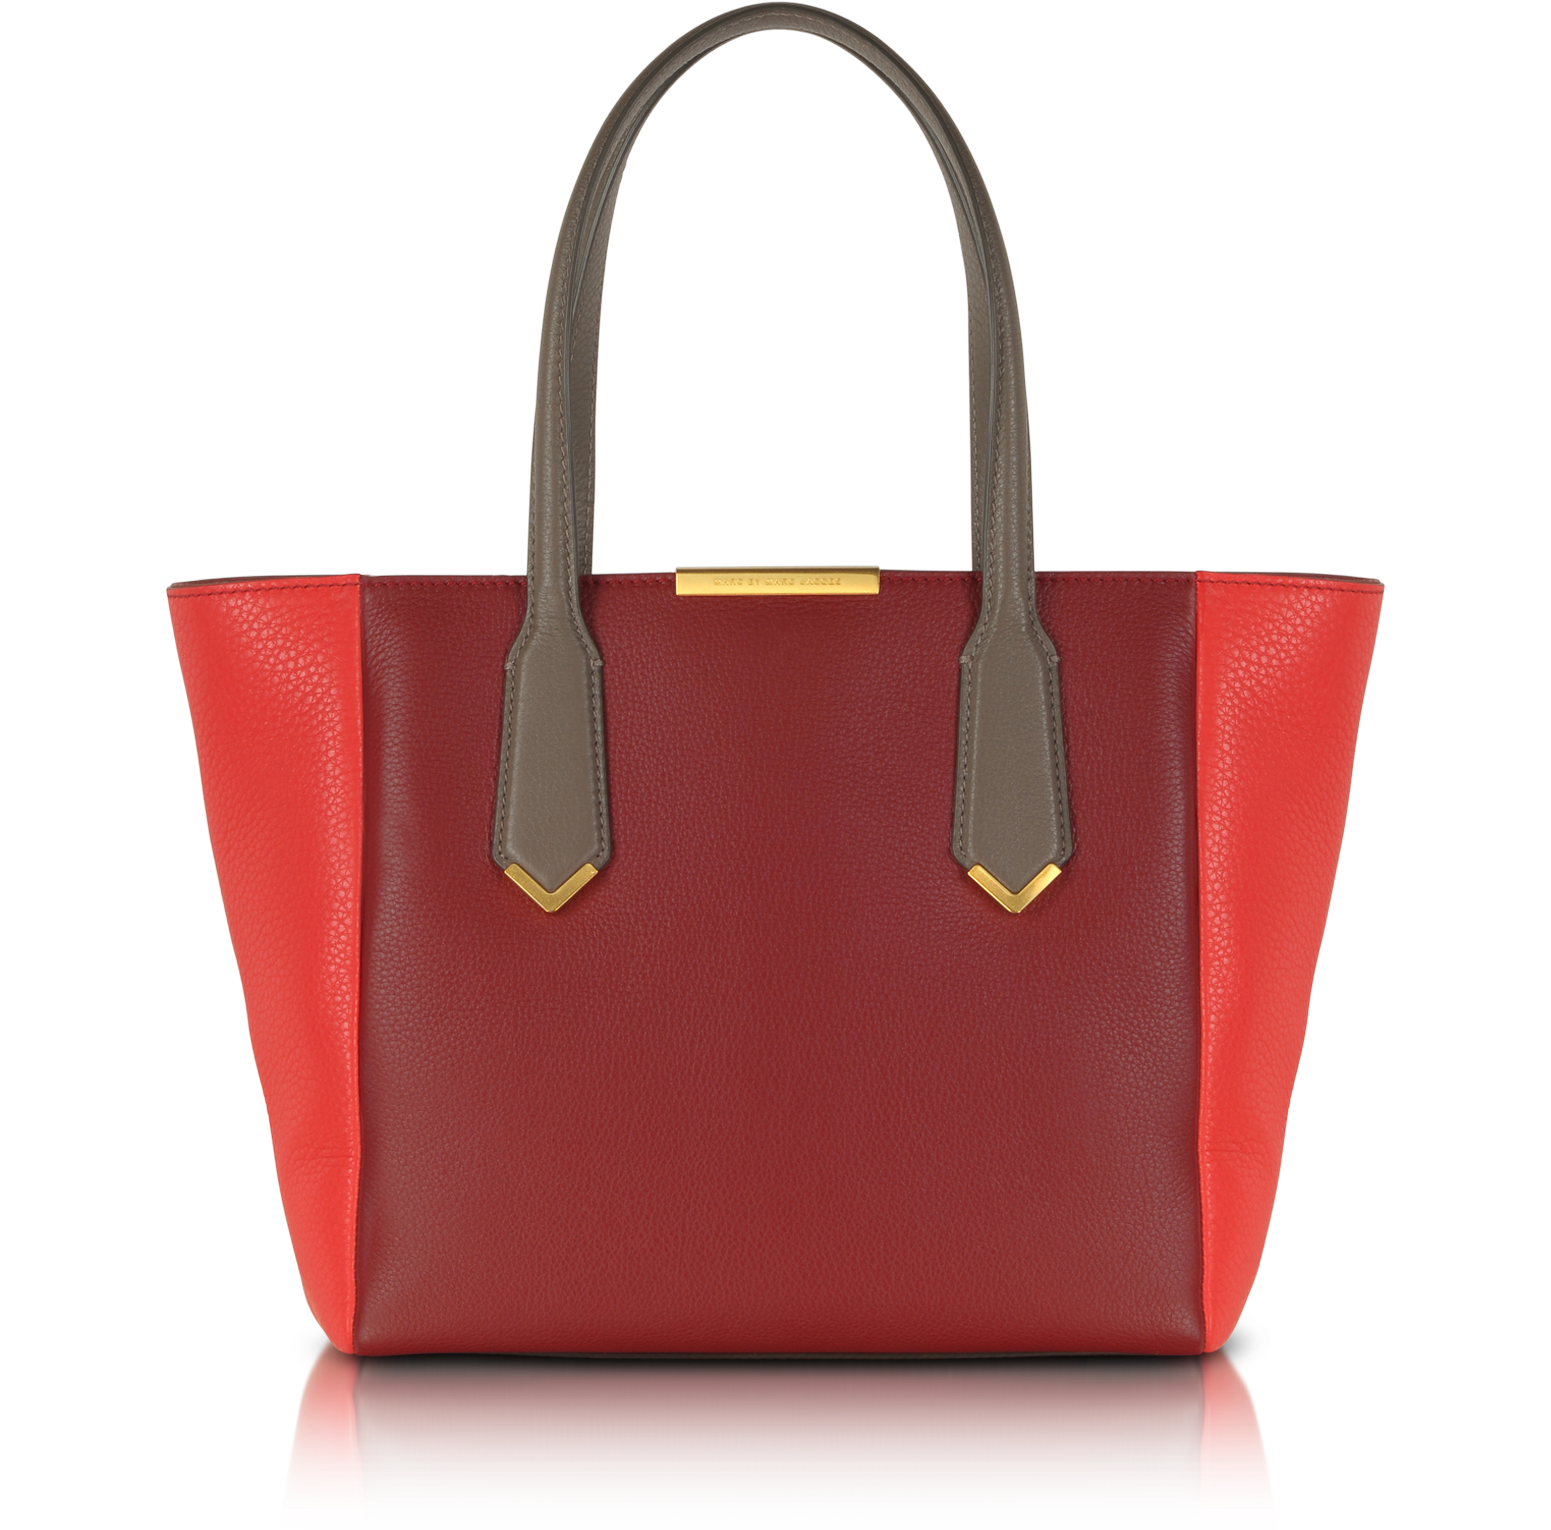 Marc by Marc Jacobs Hail To The Queen Elizabeth Tote at FORZIERI